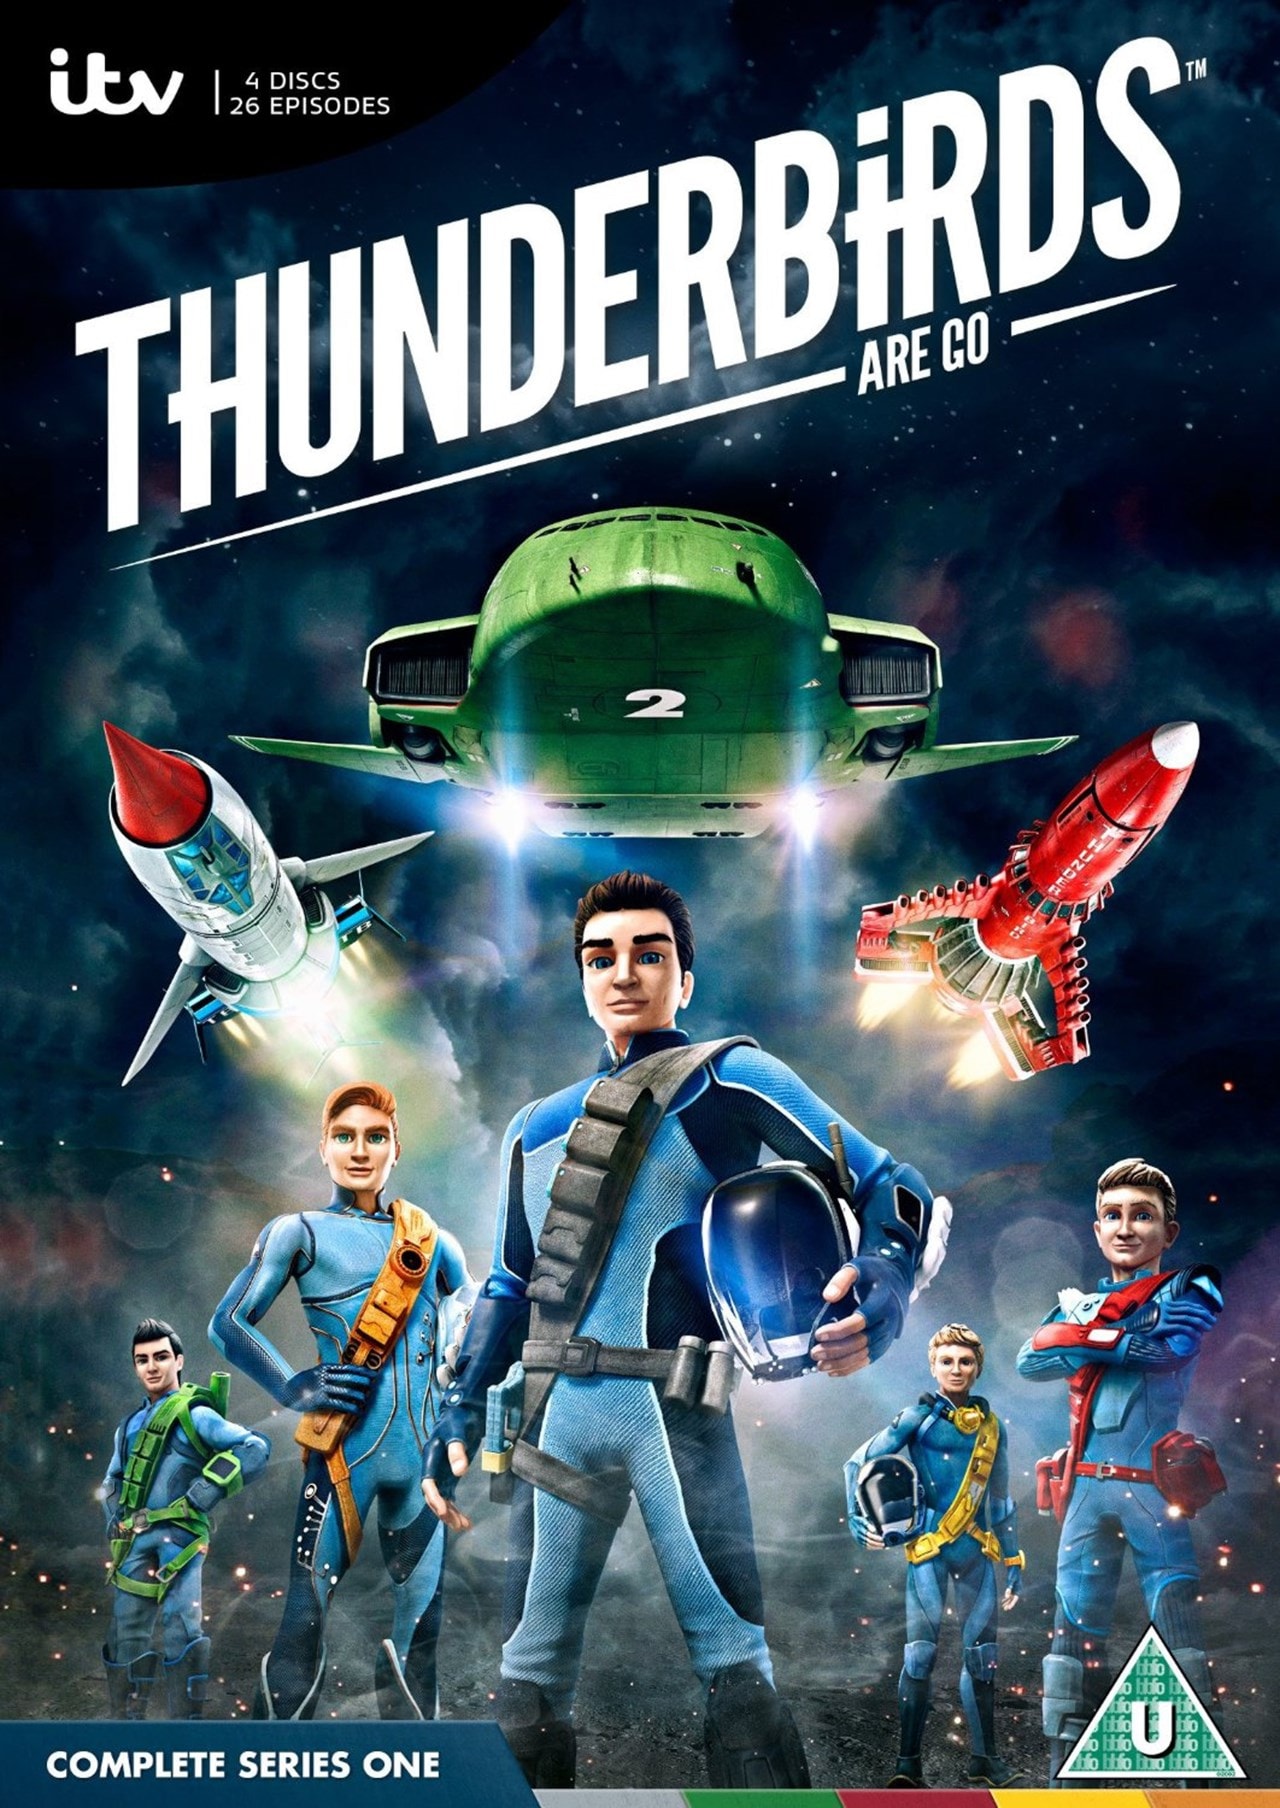 Thunderbirds Are Go Complete Series 1 DVD Box Set Free shipping